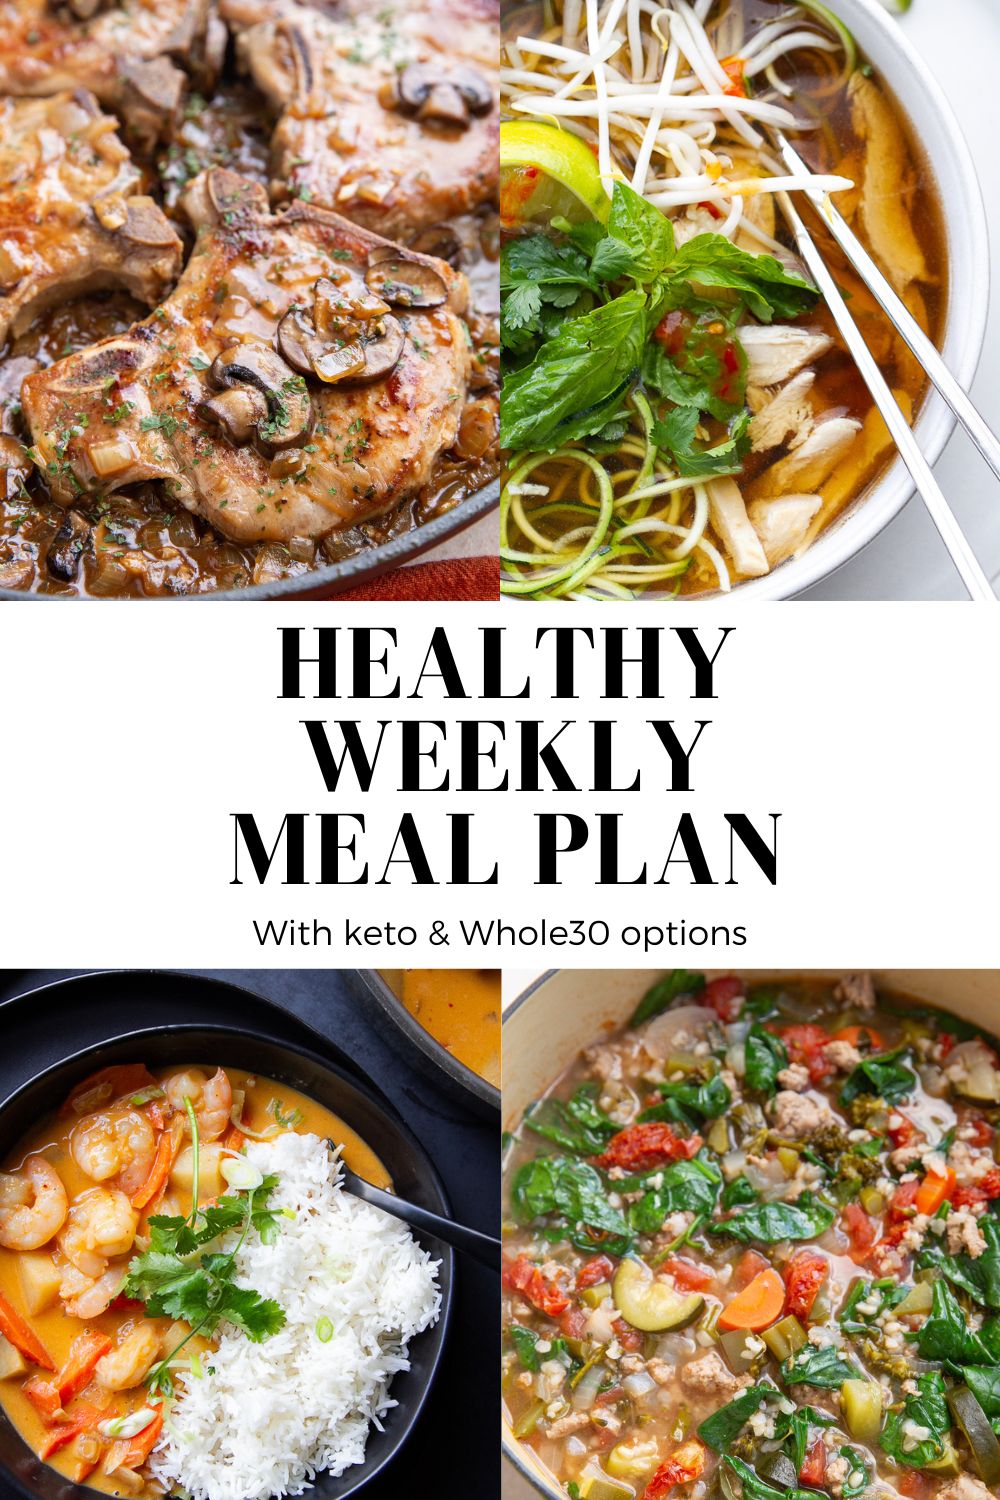 Meal plan collage